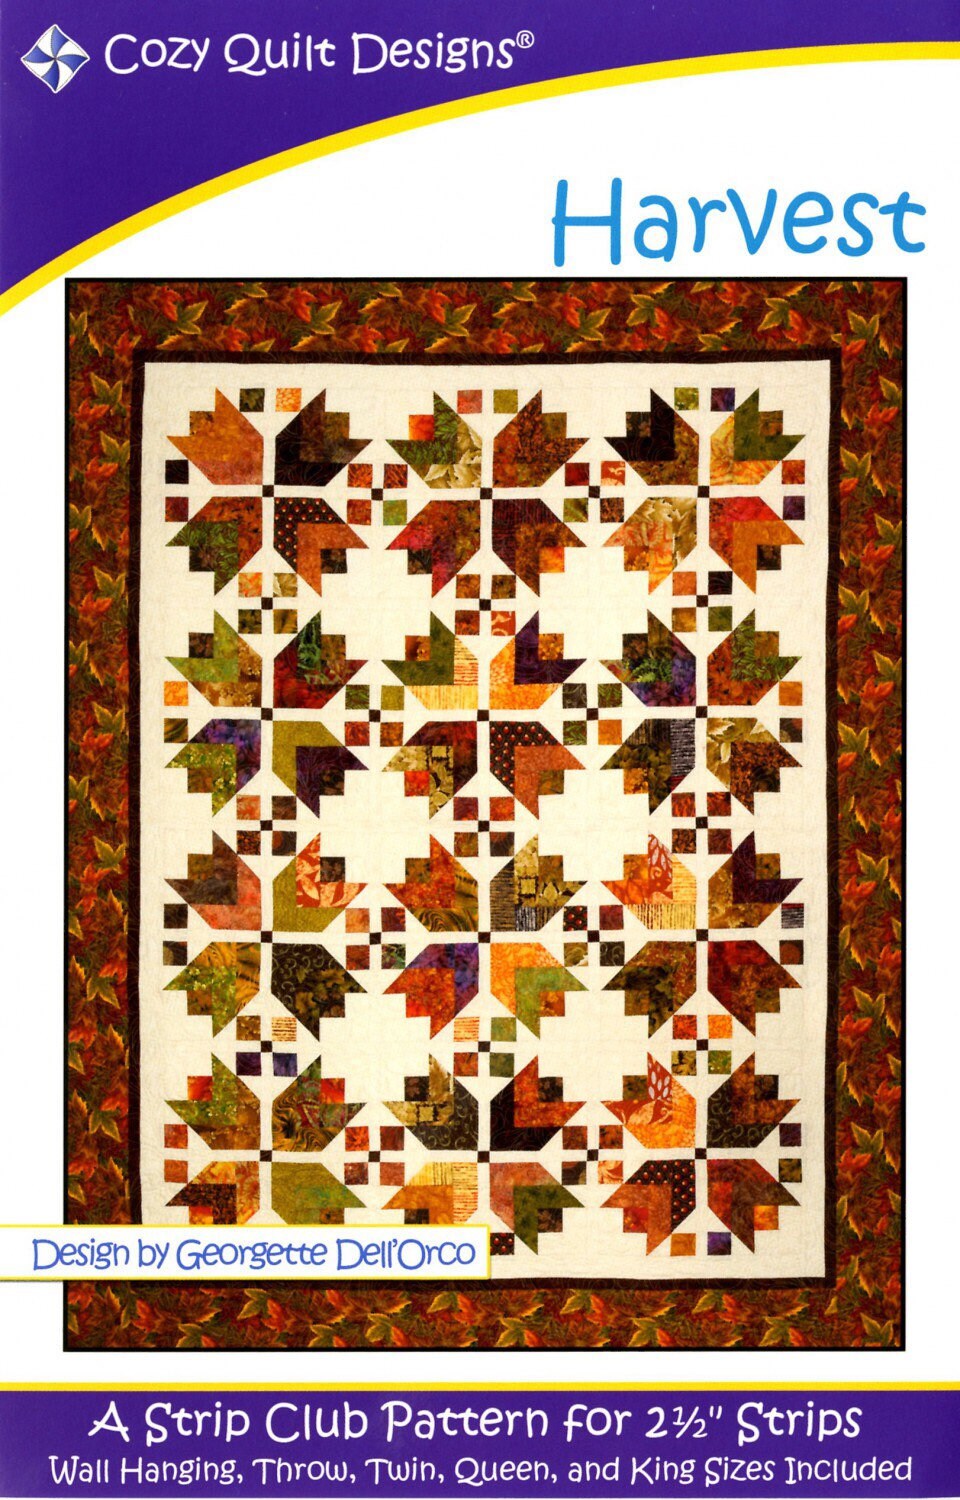 Harvest Quilt Pattern - Cozy Quilt Designs - Georgette Dell’Orco - Jelly Roll Friendly